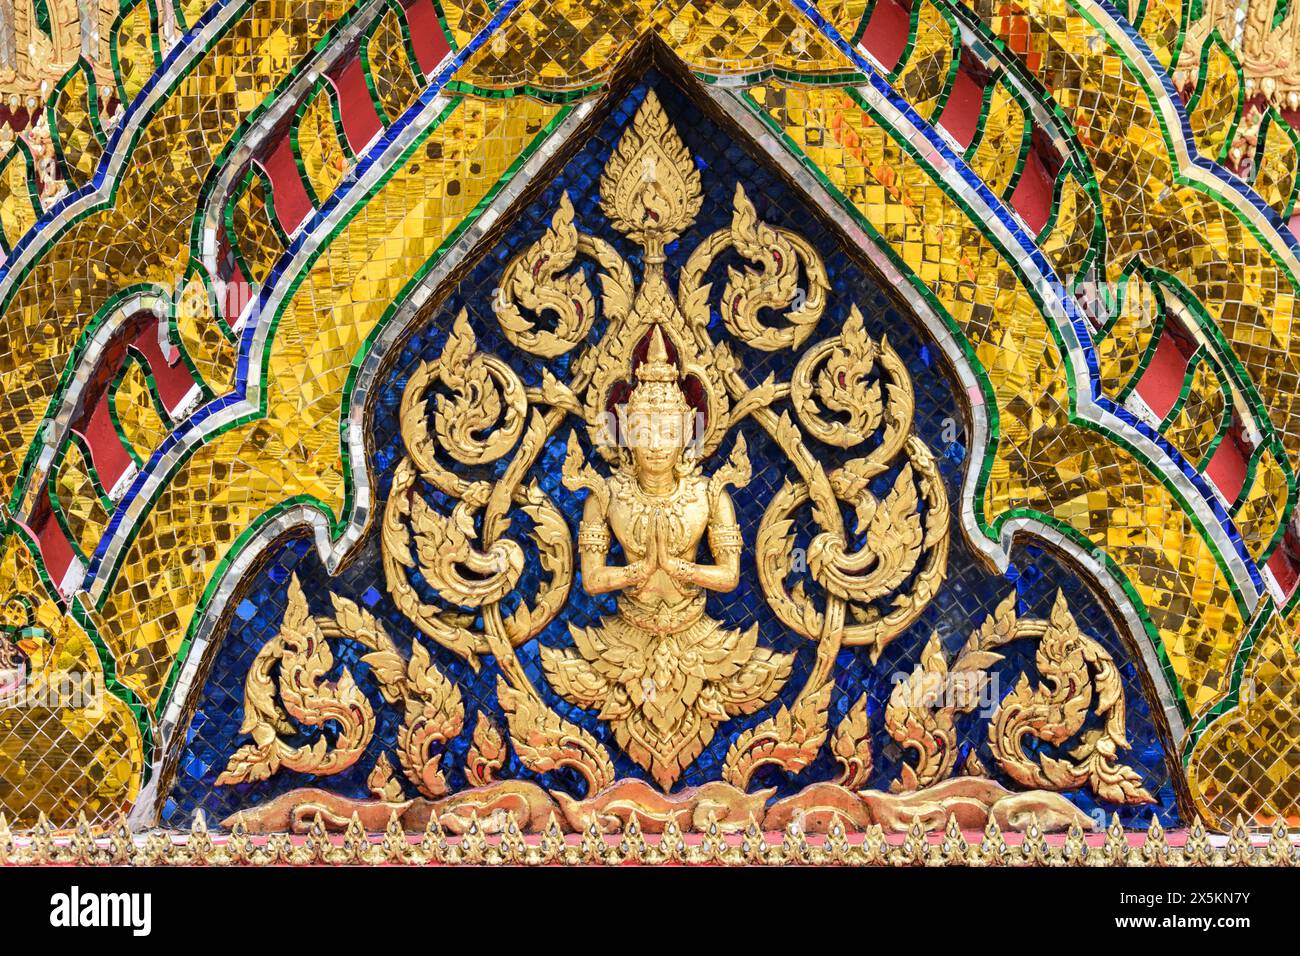 Colourful wall decorations in Wat Phra Kaew. Stock Photo